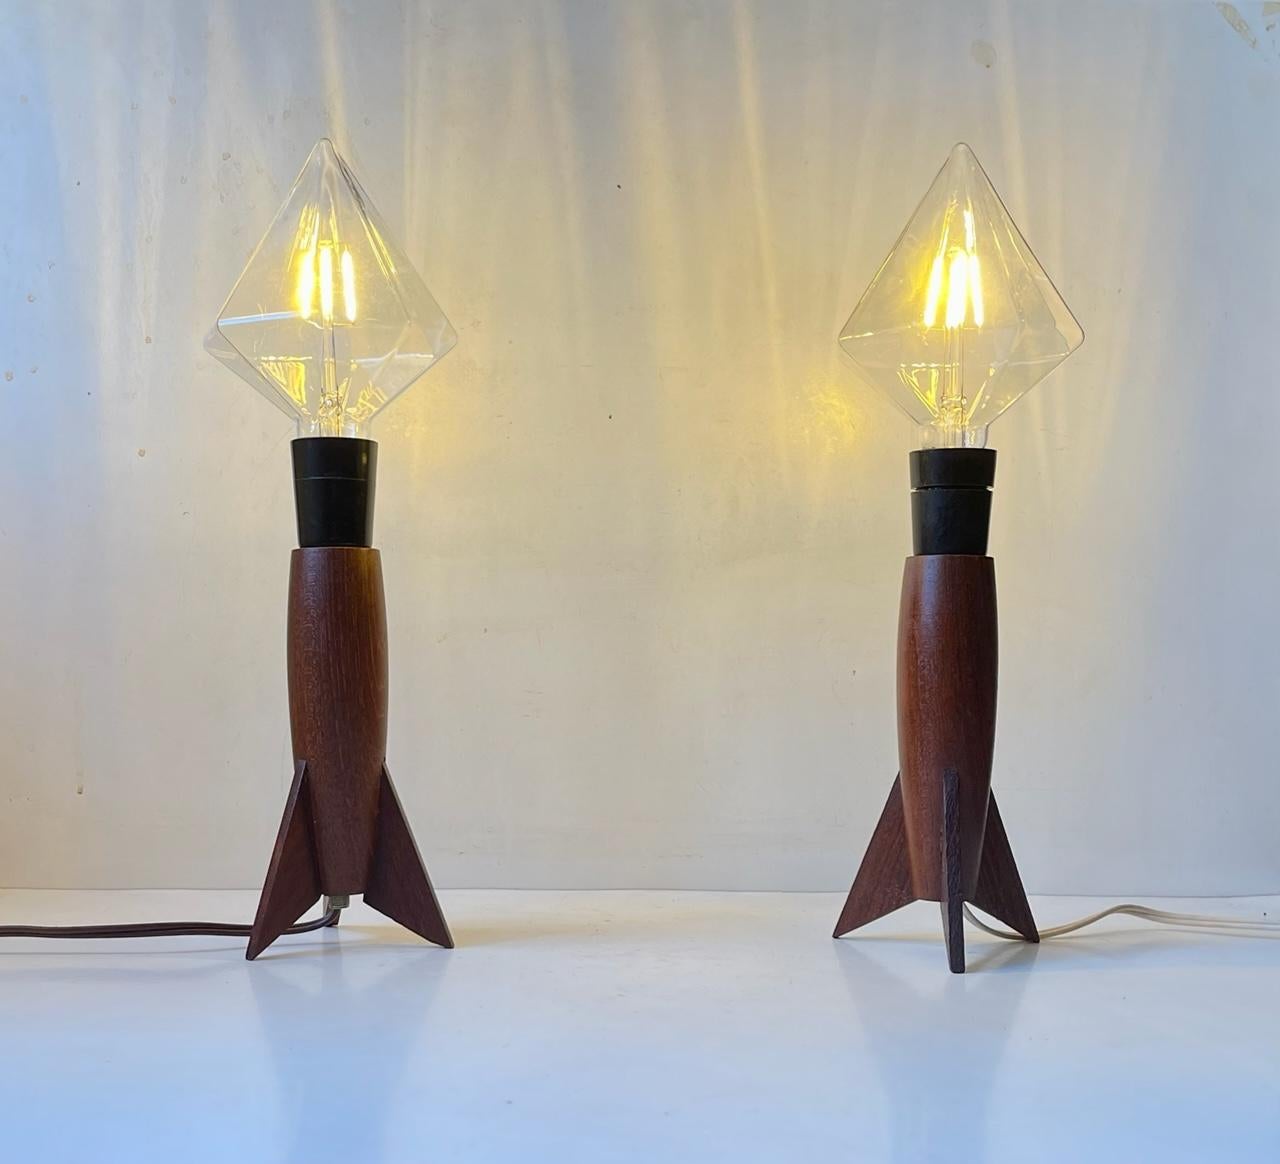 A matching pair of rocket shaped table light. They are made from teak and mounted with newer conical everlasting jumbo bulbs. The bases were made in Scandinavia, probably Denmark, during the 1960s or 70s by a trained carpenter or furniture maker.